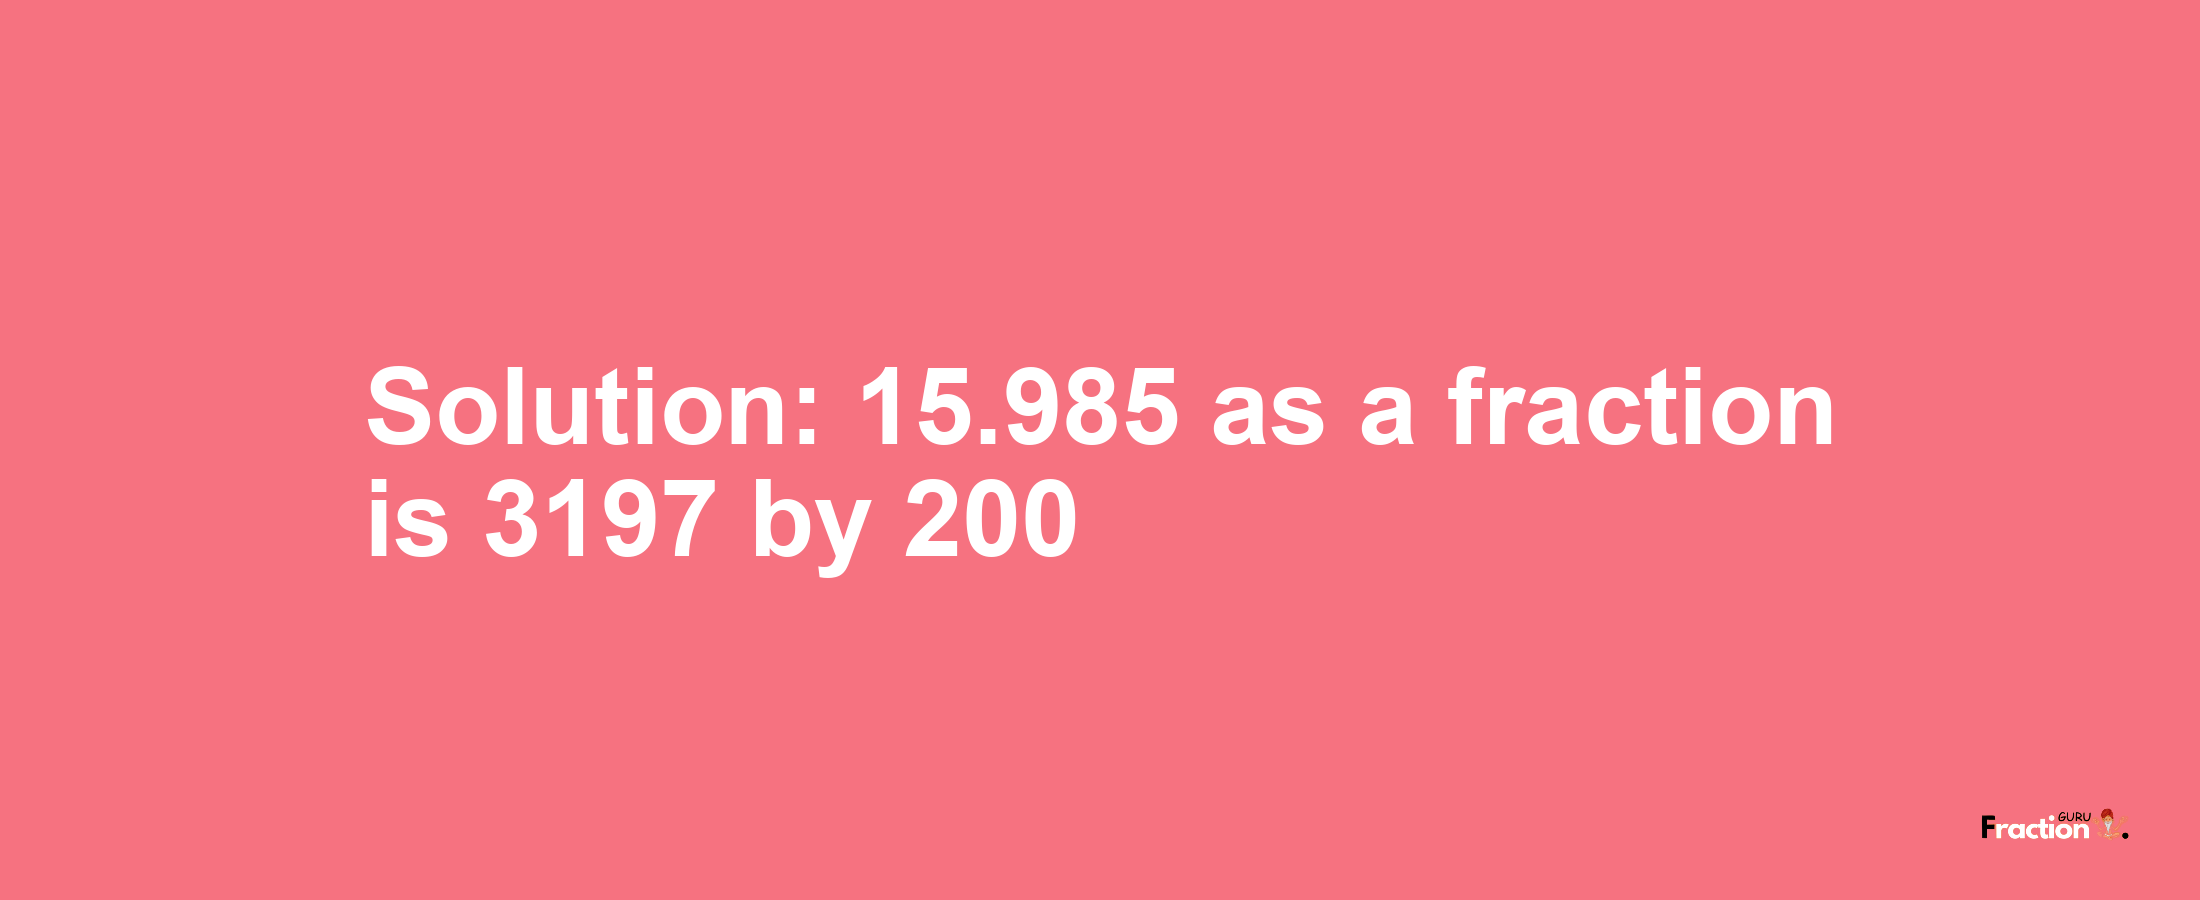 Solution:15.985 as a fraction is 3197/200